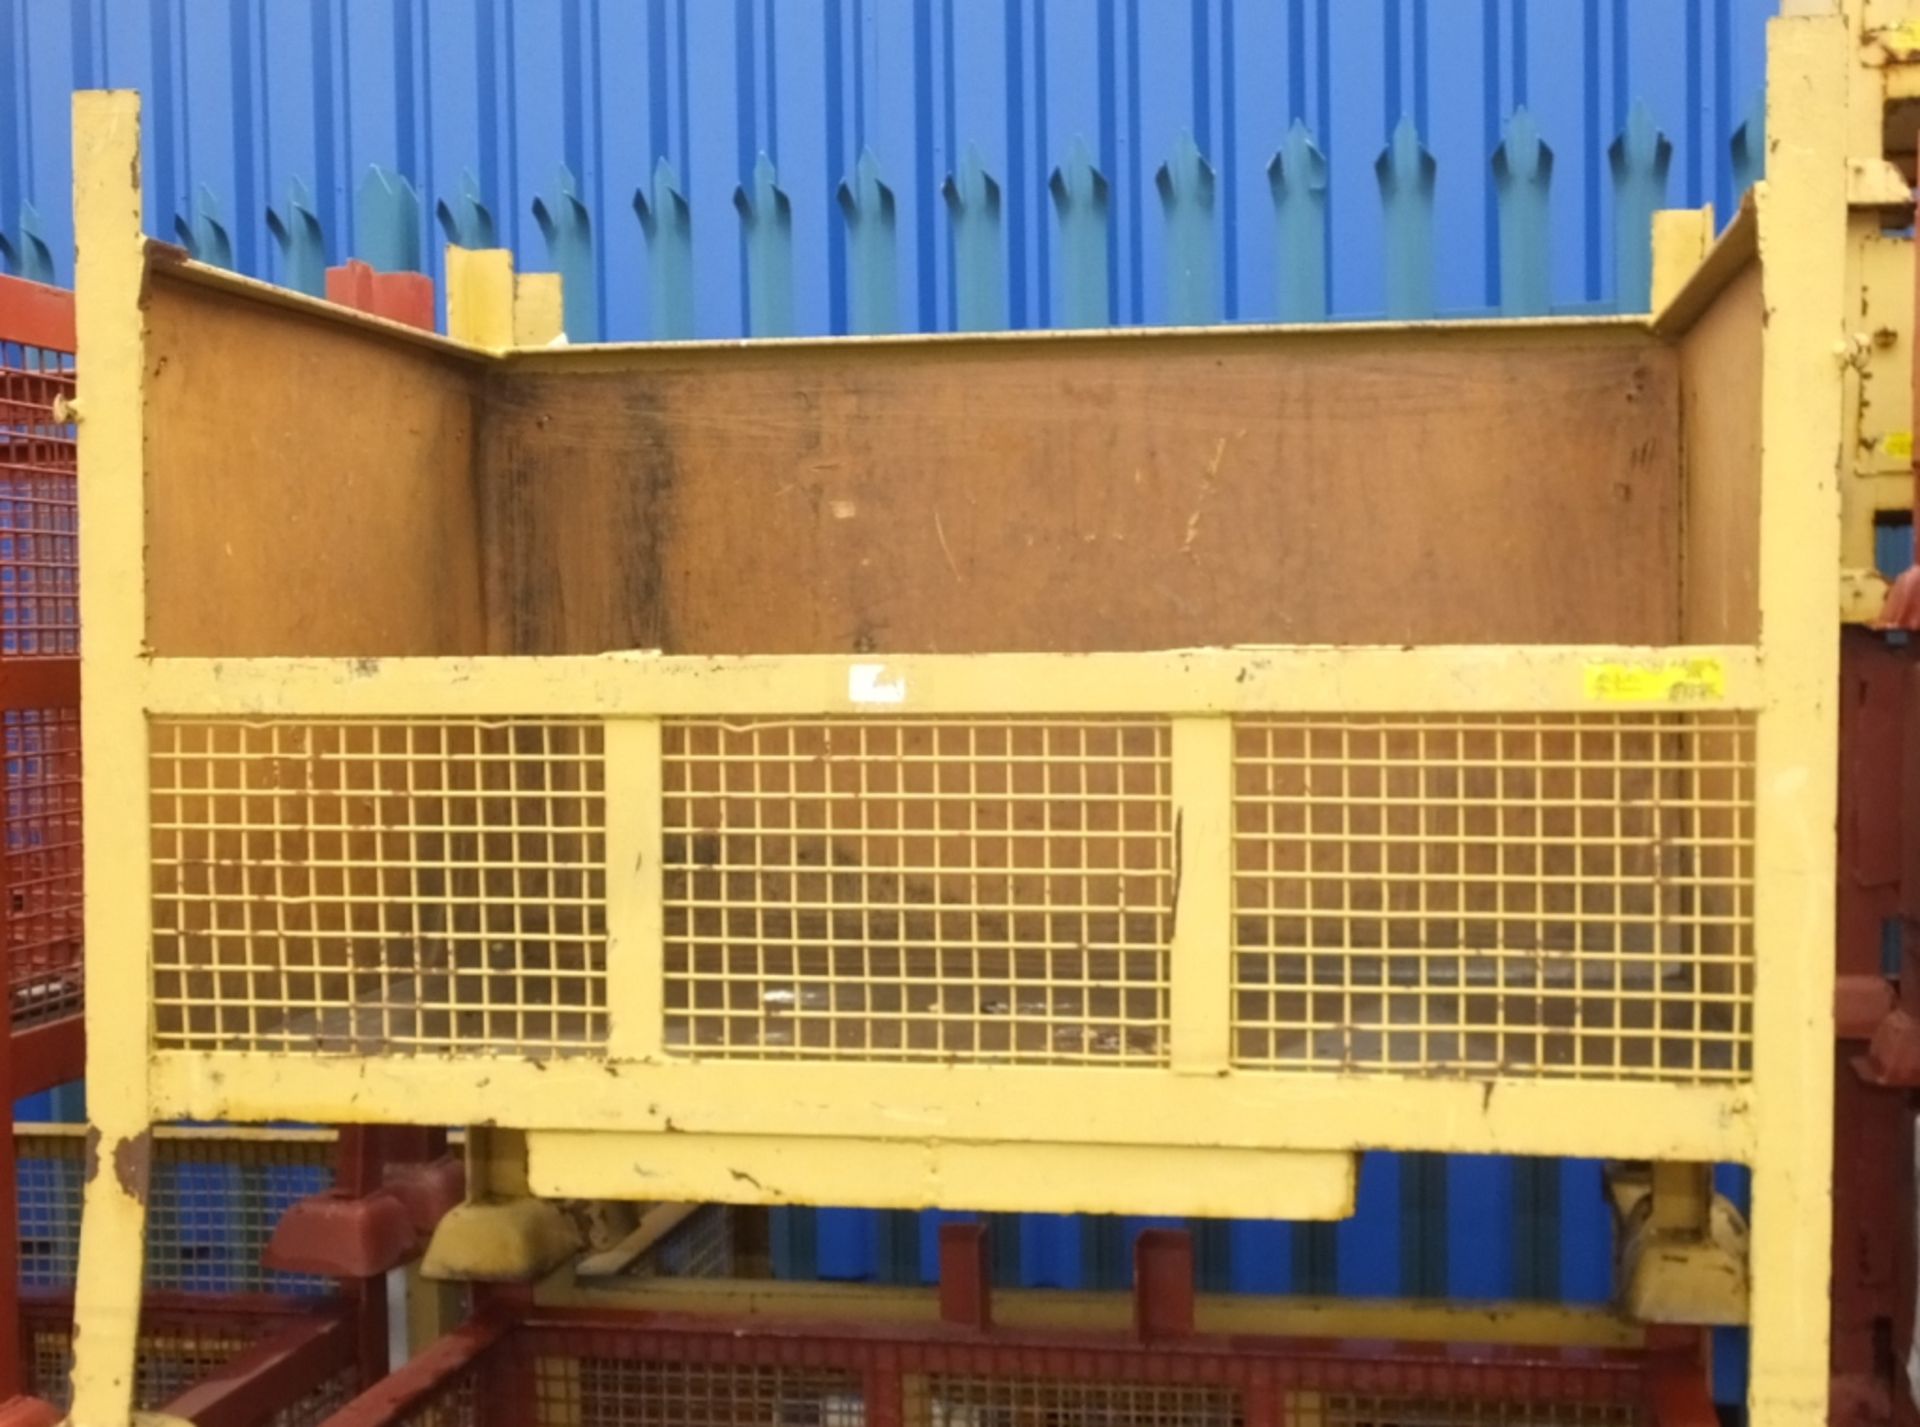 4x Welded solid caged stillages - Please note there will be a loading fee of £5 on this it - Image 3 of 3